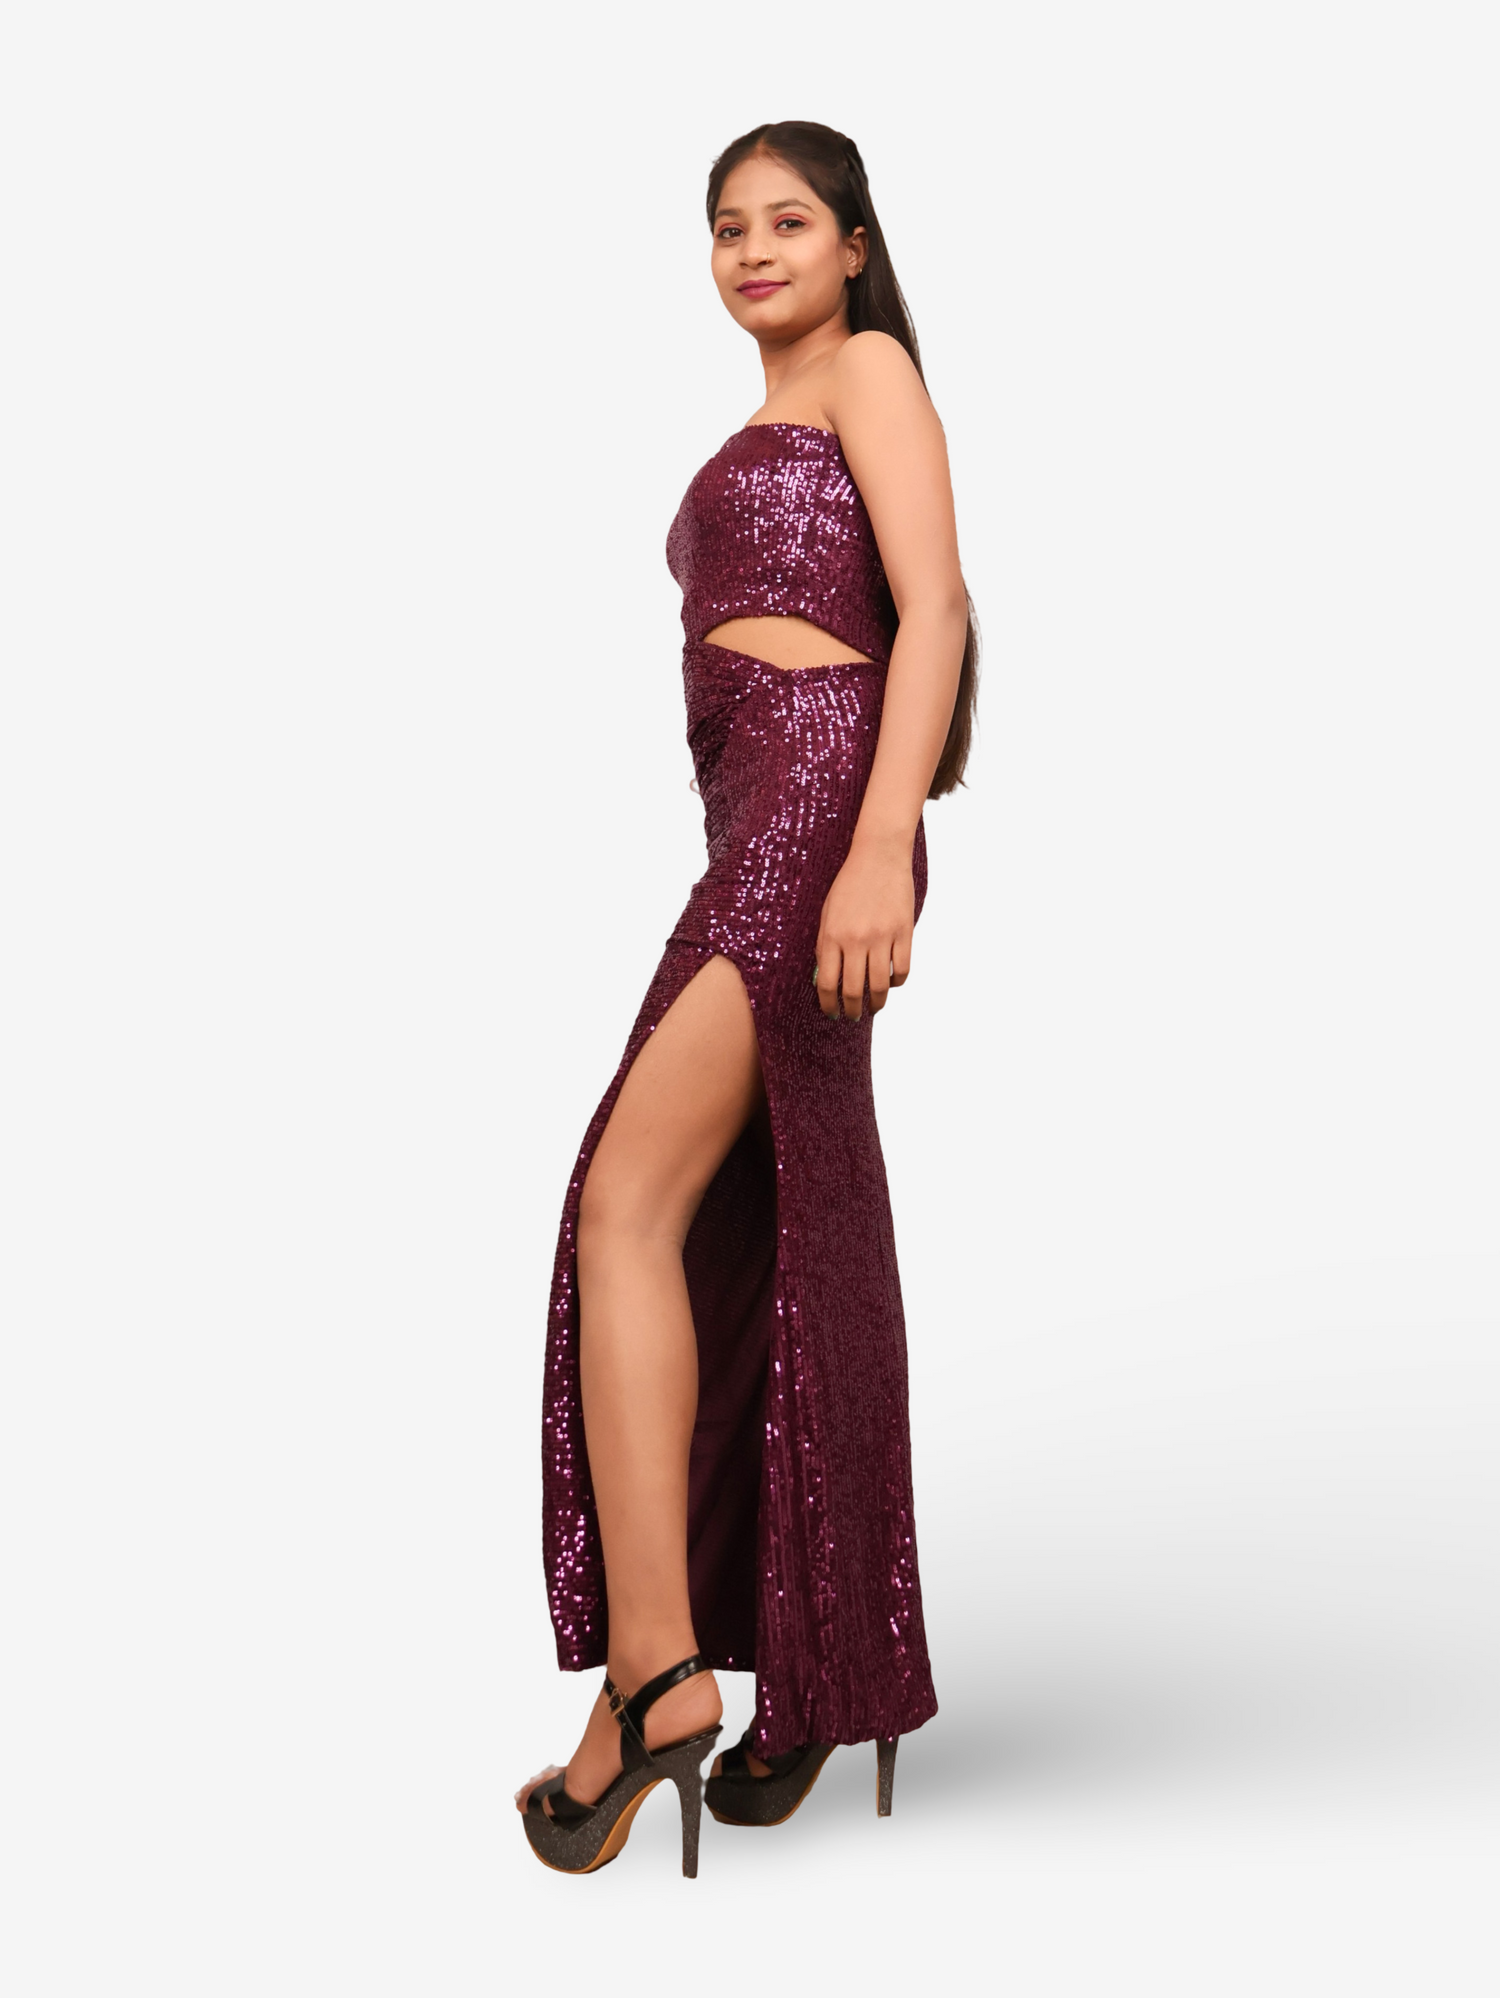 Wine Sequins One-Shoulder Maxi Party Dress by Shreekama Wine Small Dress for Party Festival Wedding Occasion in Noida